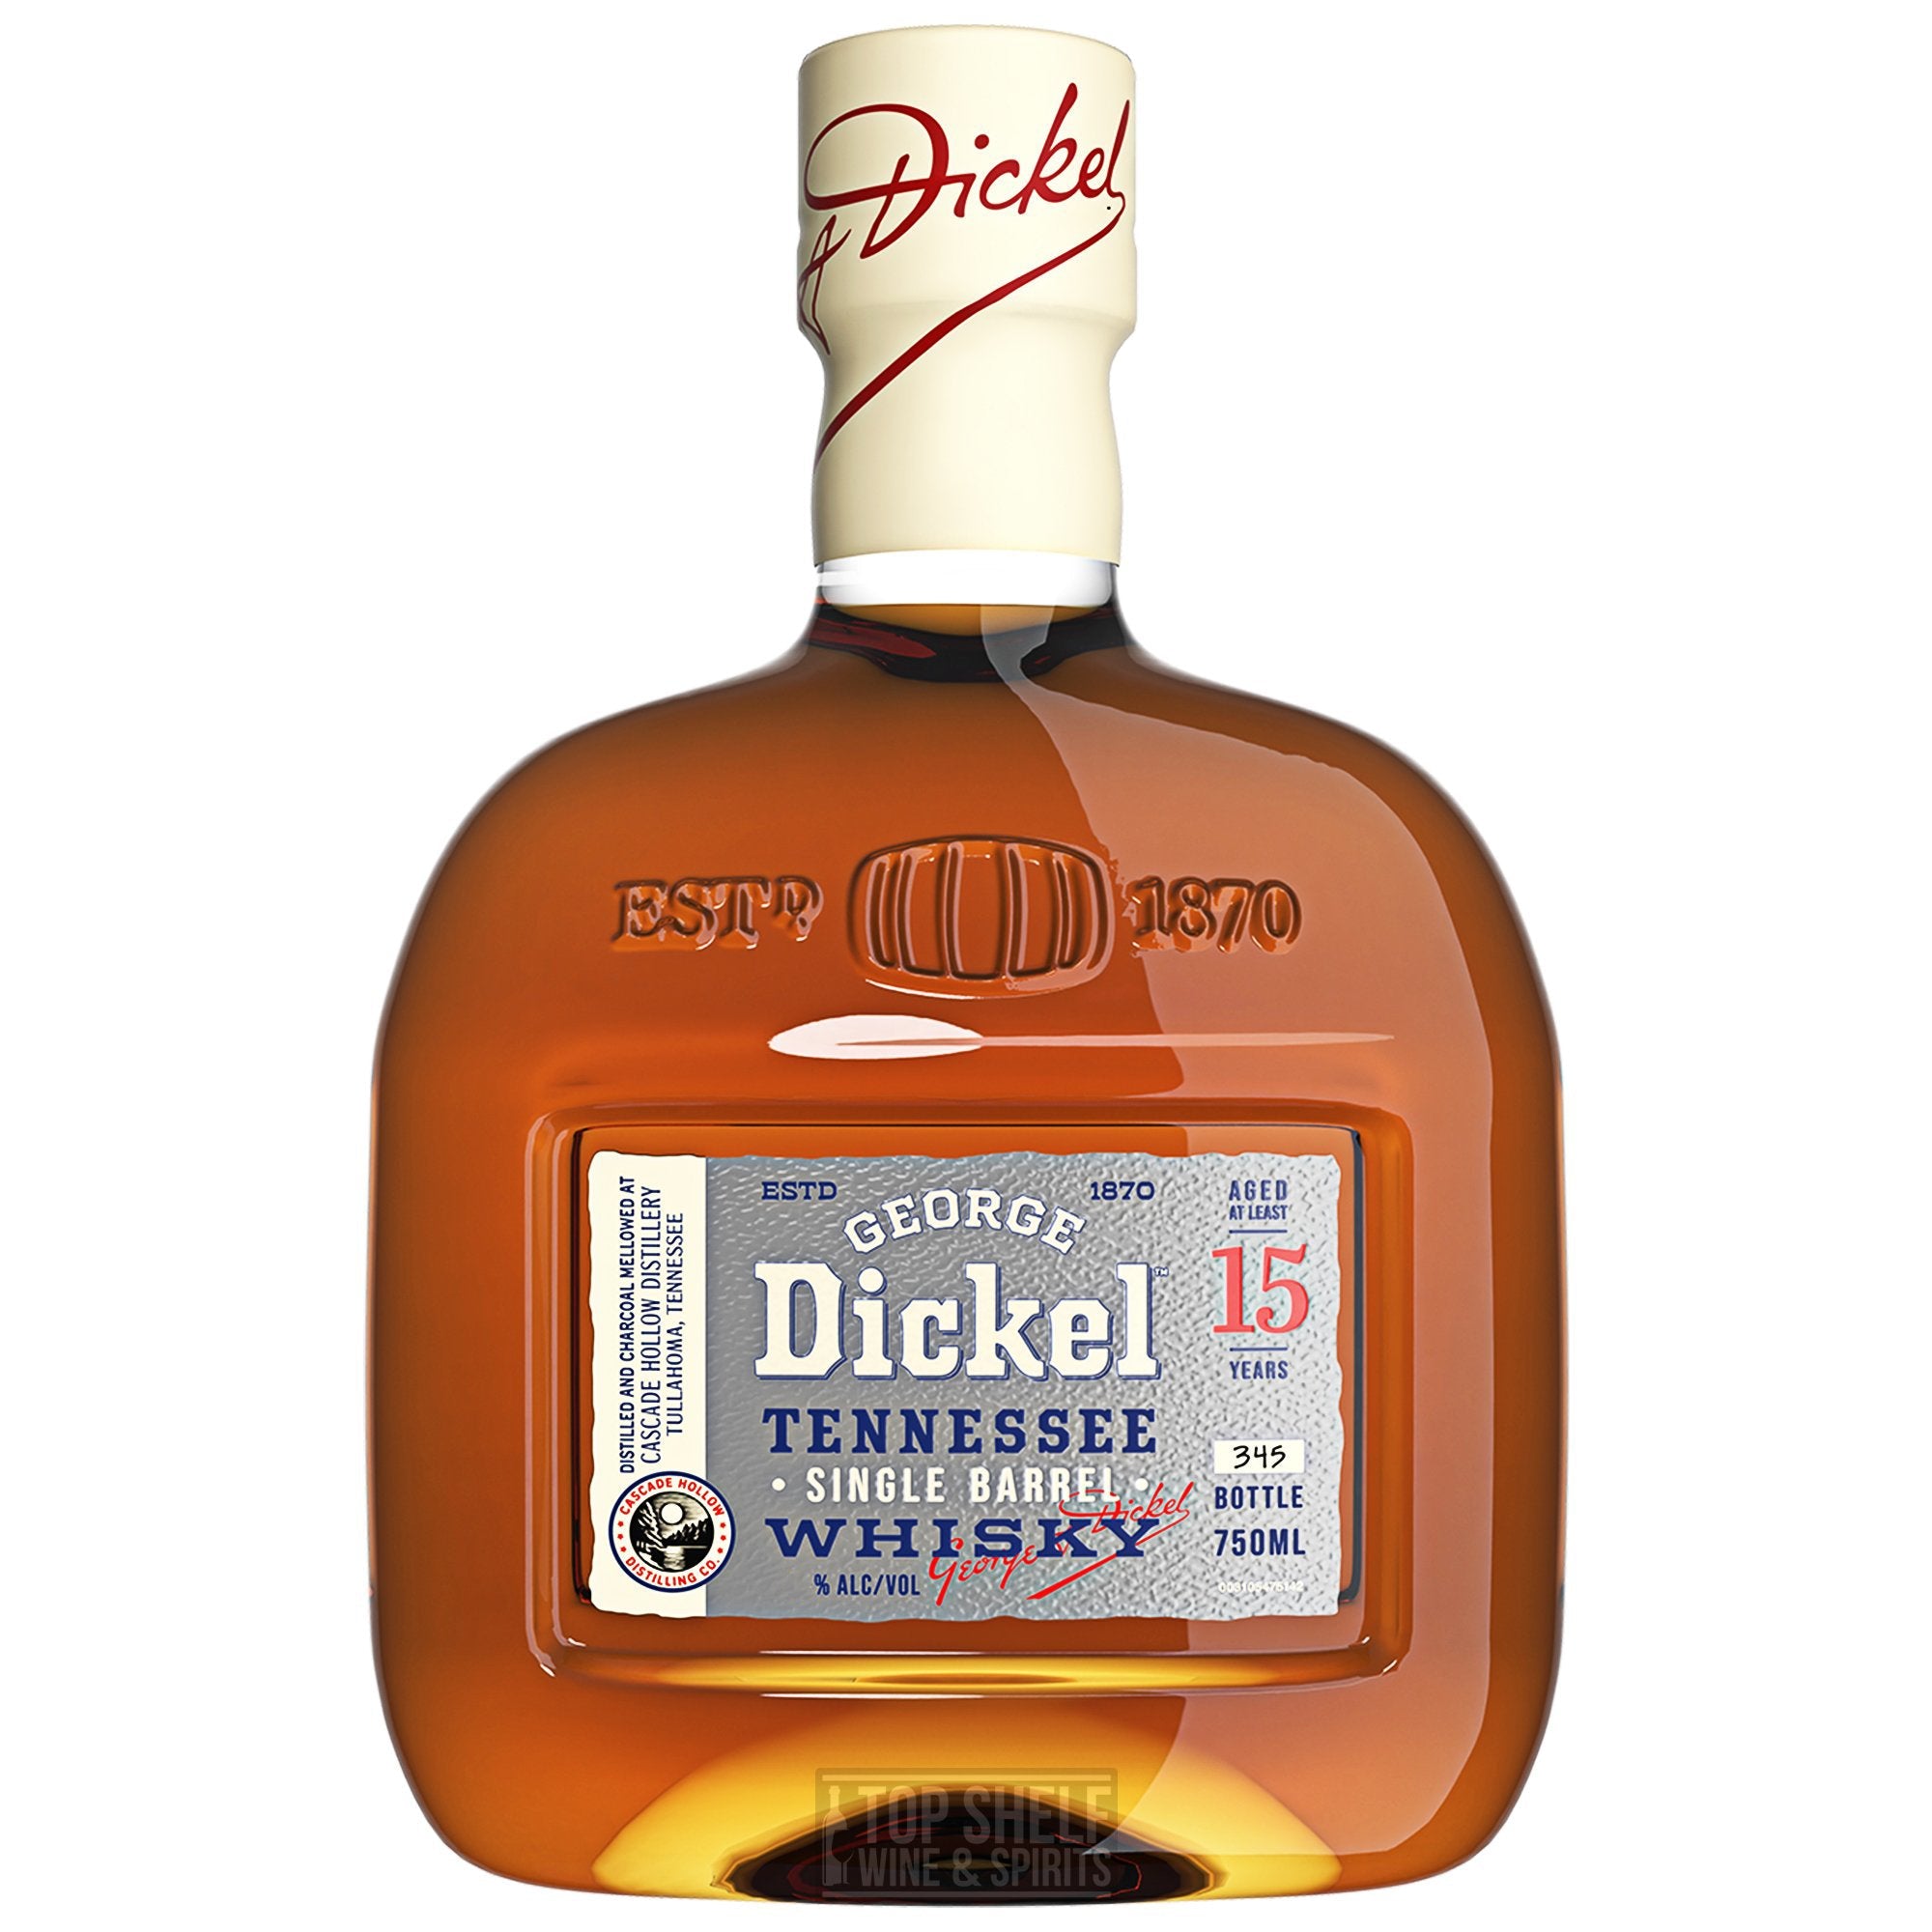 George Dickel Tennessee Whiskey 101.2 Proof 15 Year Single Barrel (Private Selection #2)